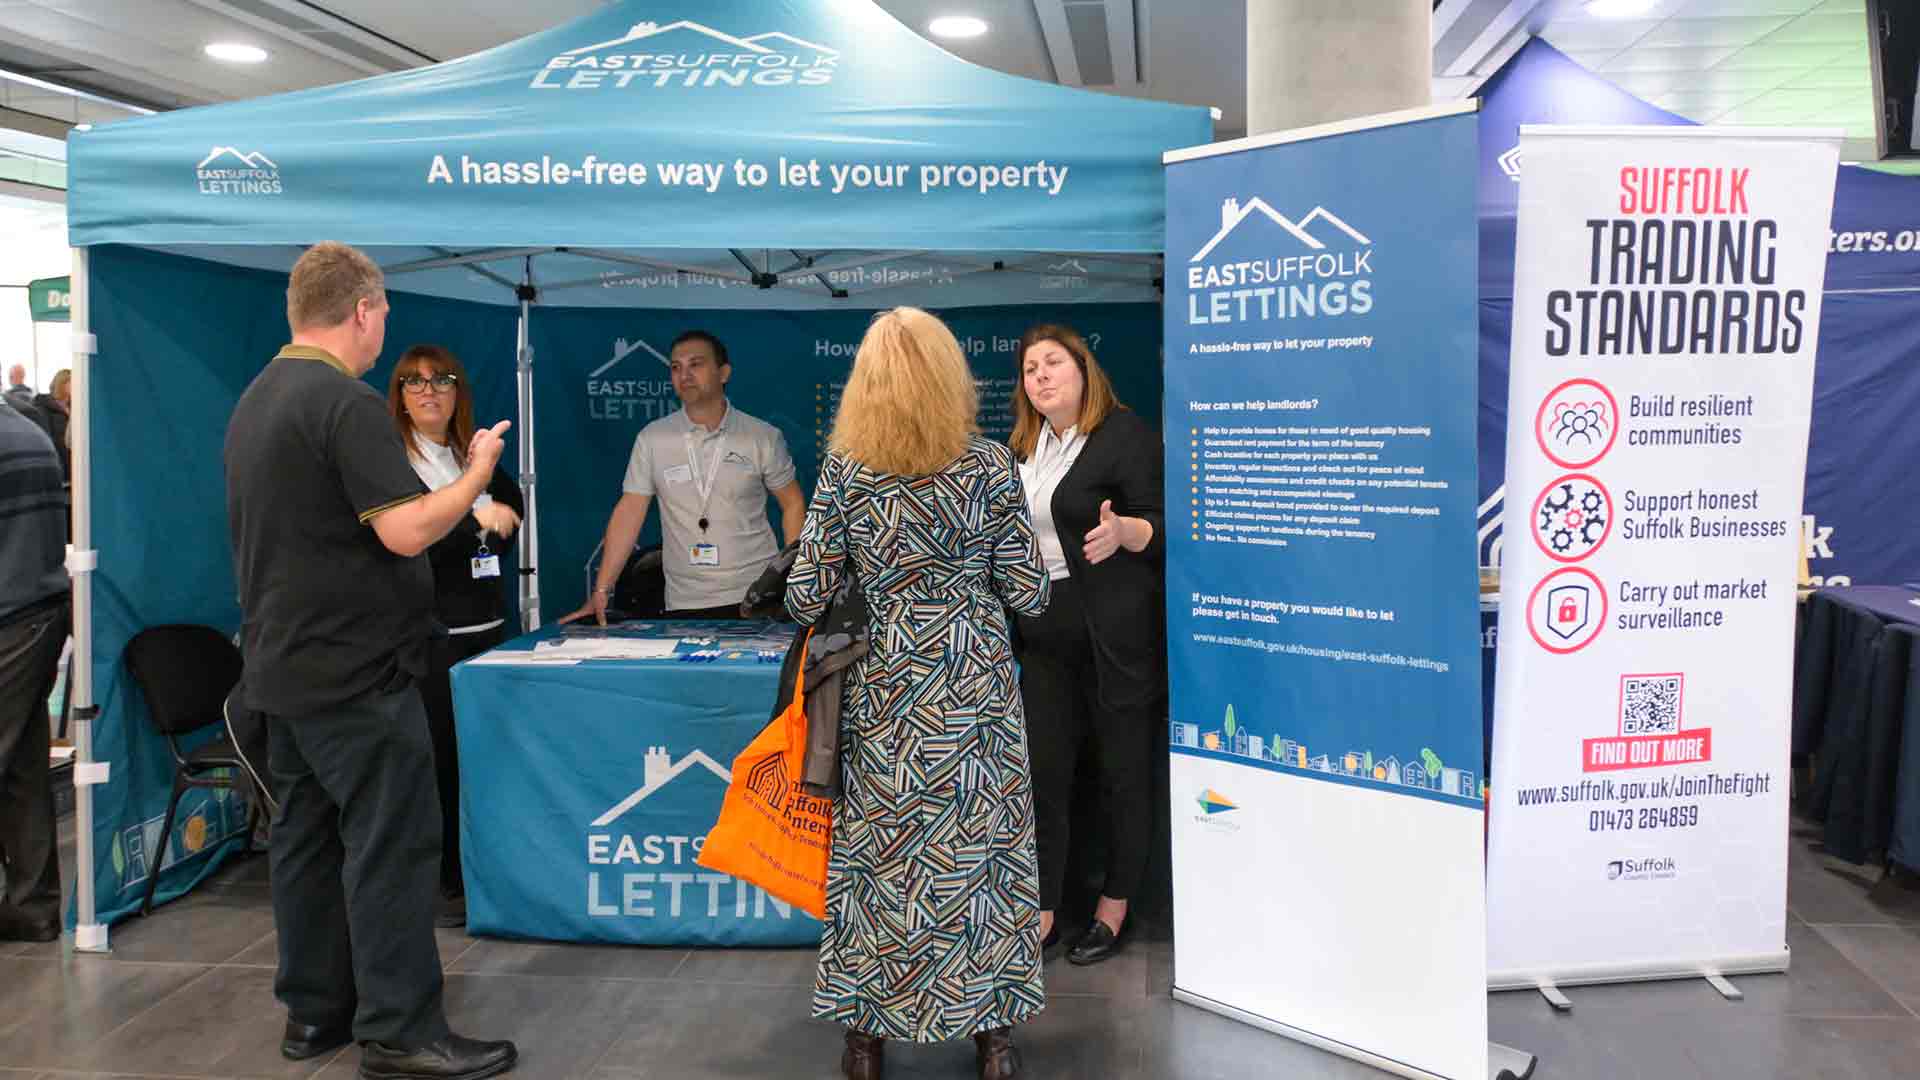 east-suffolk-lettings-event